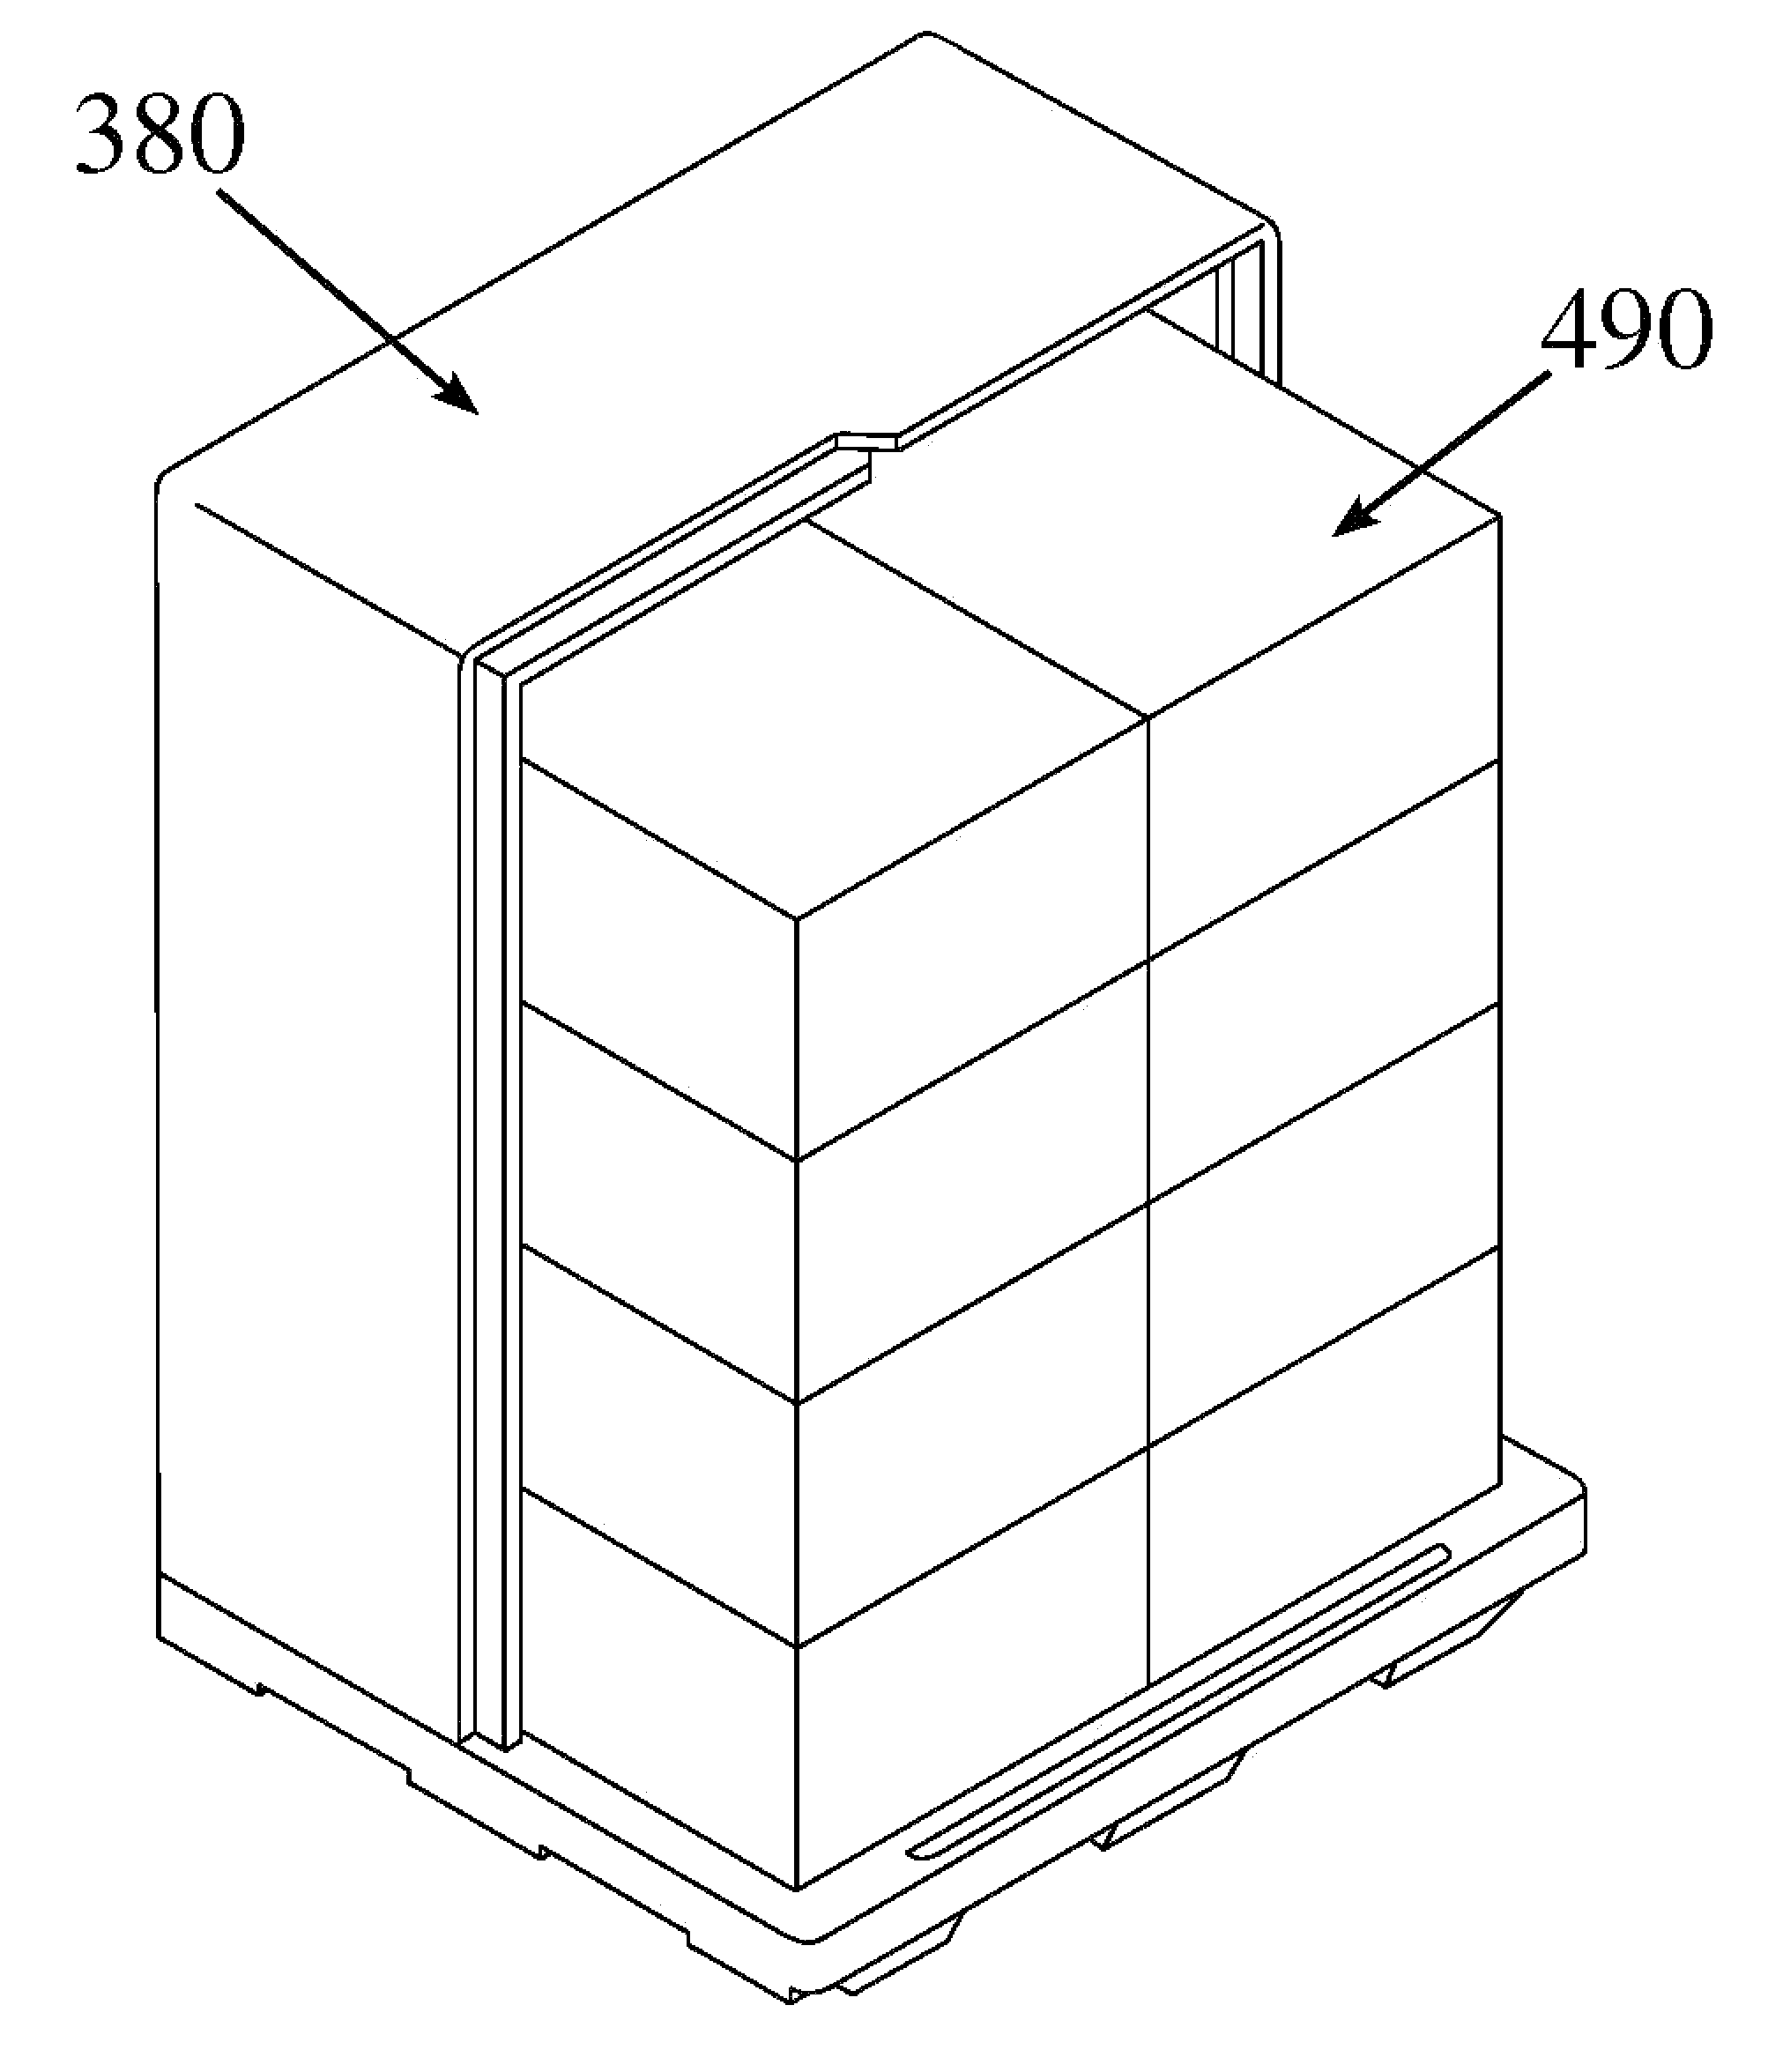 Climate control cargo container for storing,transporting and preserving cargo